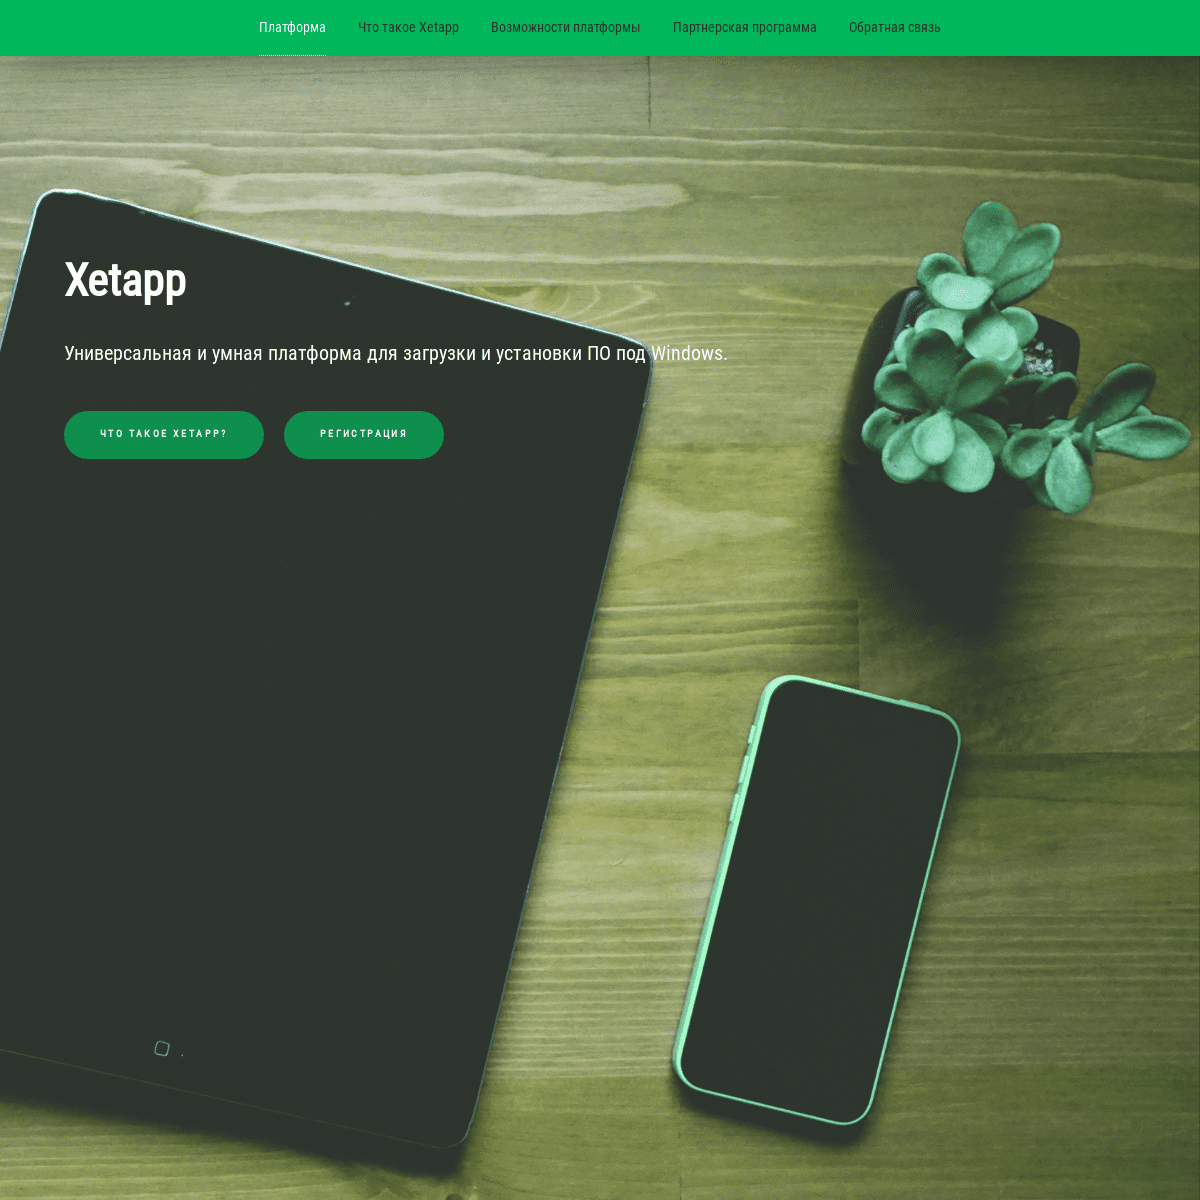 A complete backup of xetapp.com